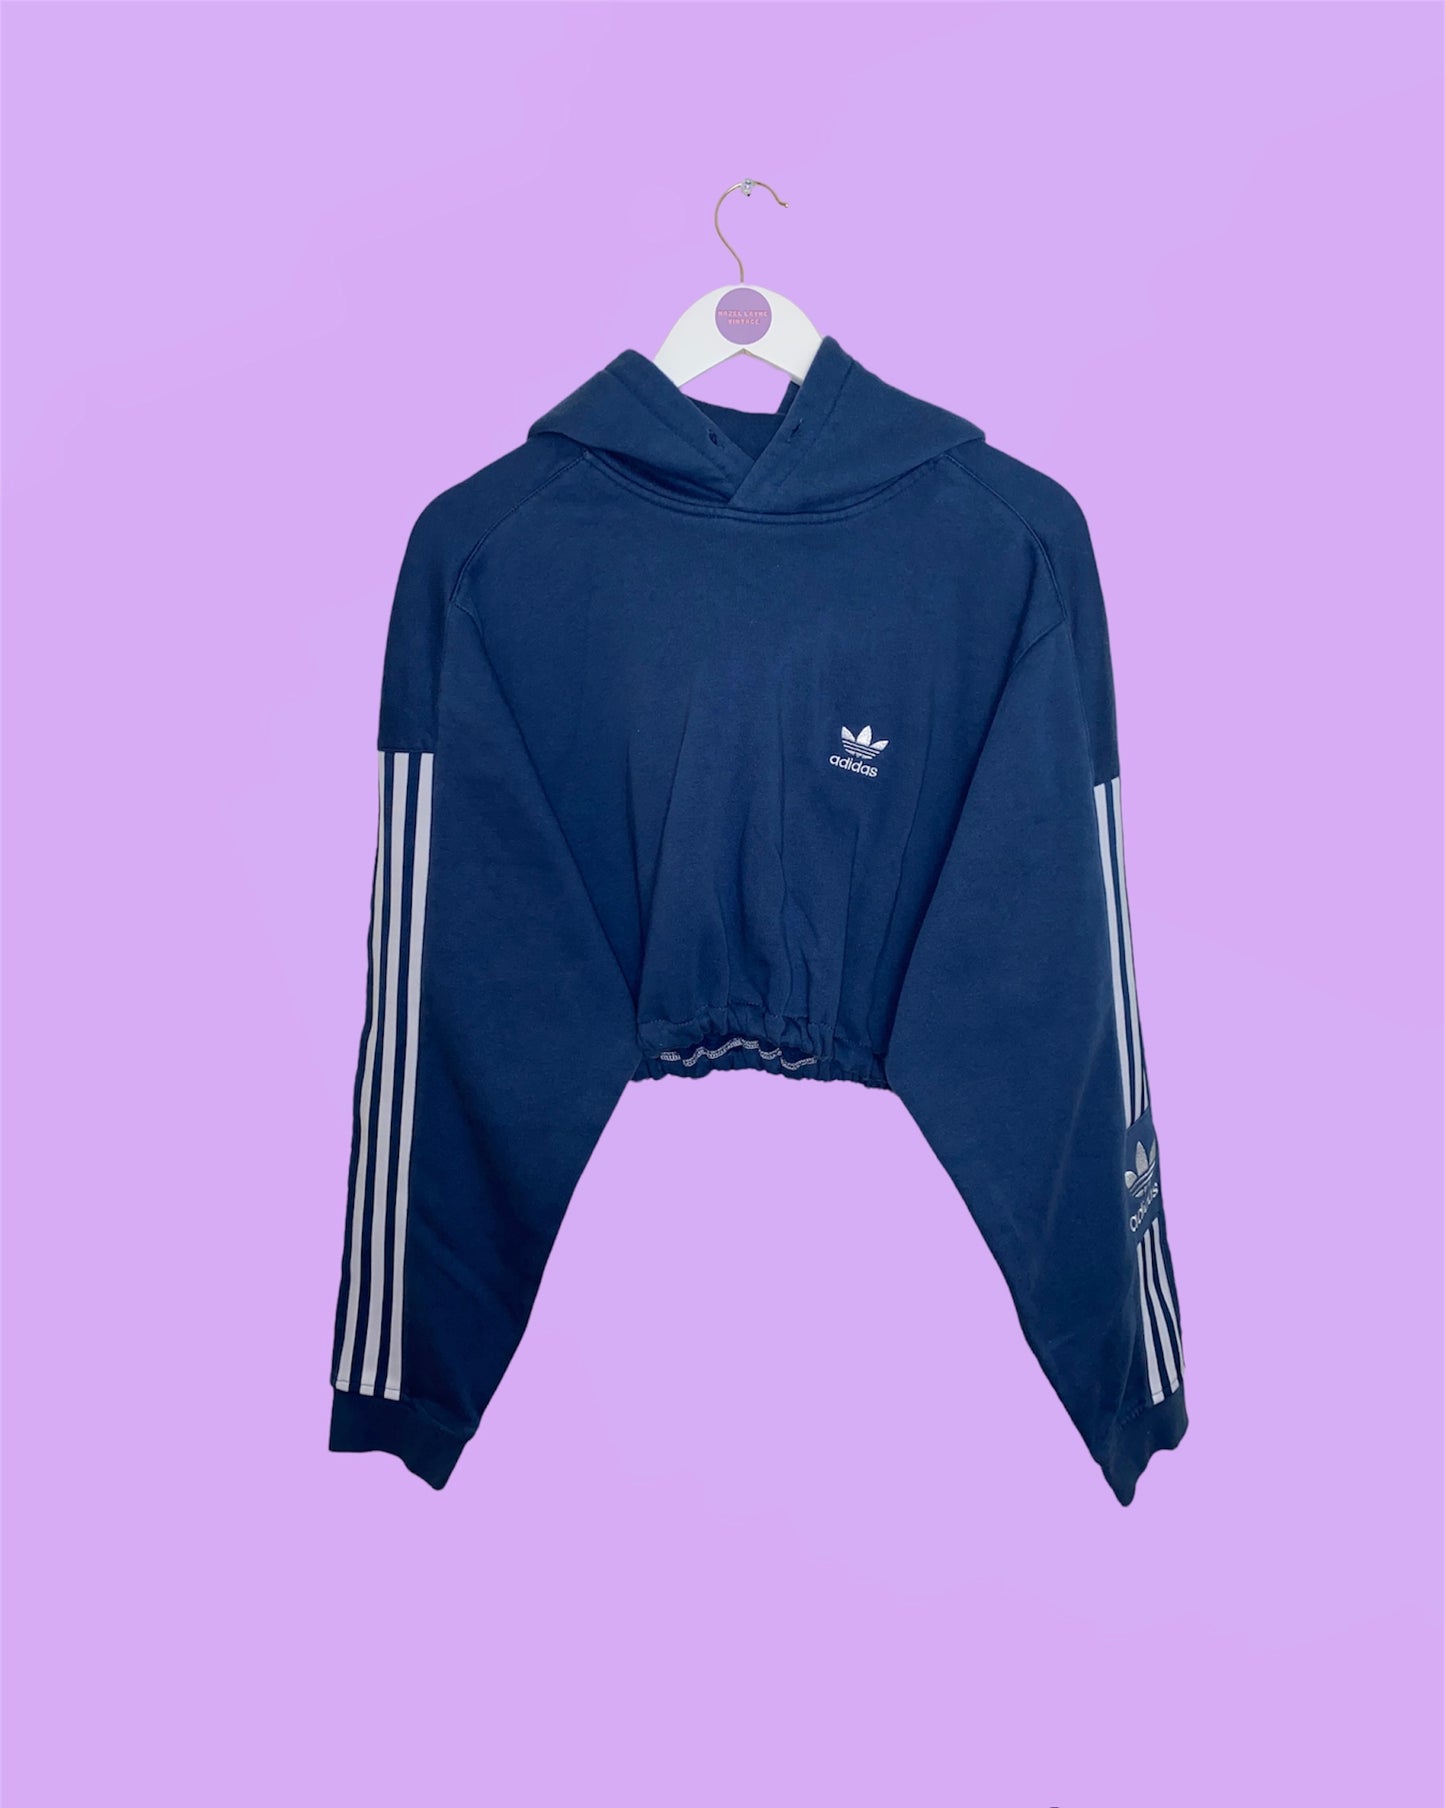 blue cropped hoodie with white adidas logo on chest and sleeves shown on a white clothes hanger on a lilac background